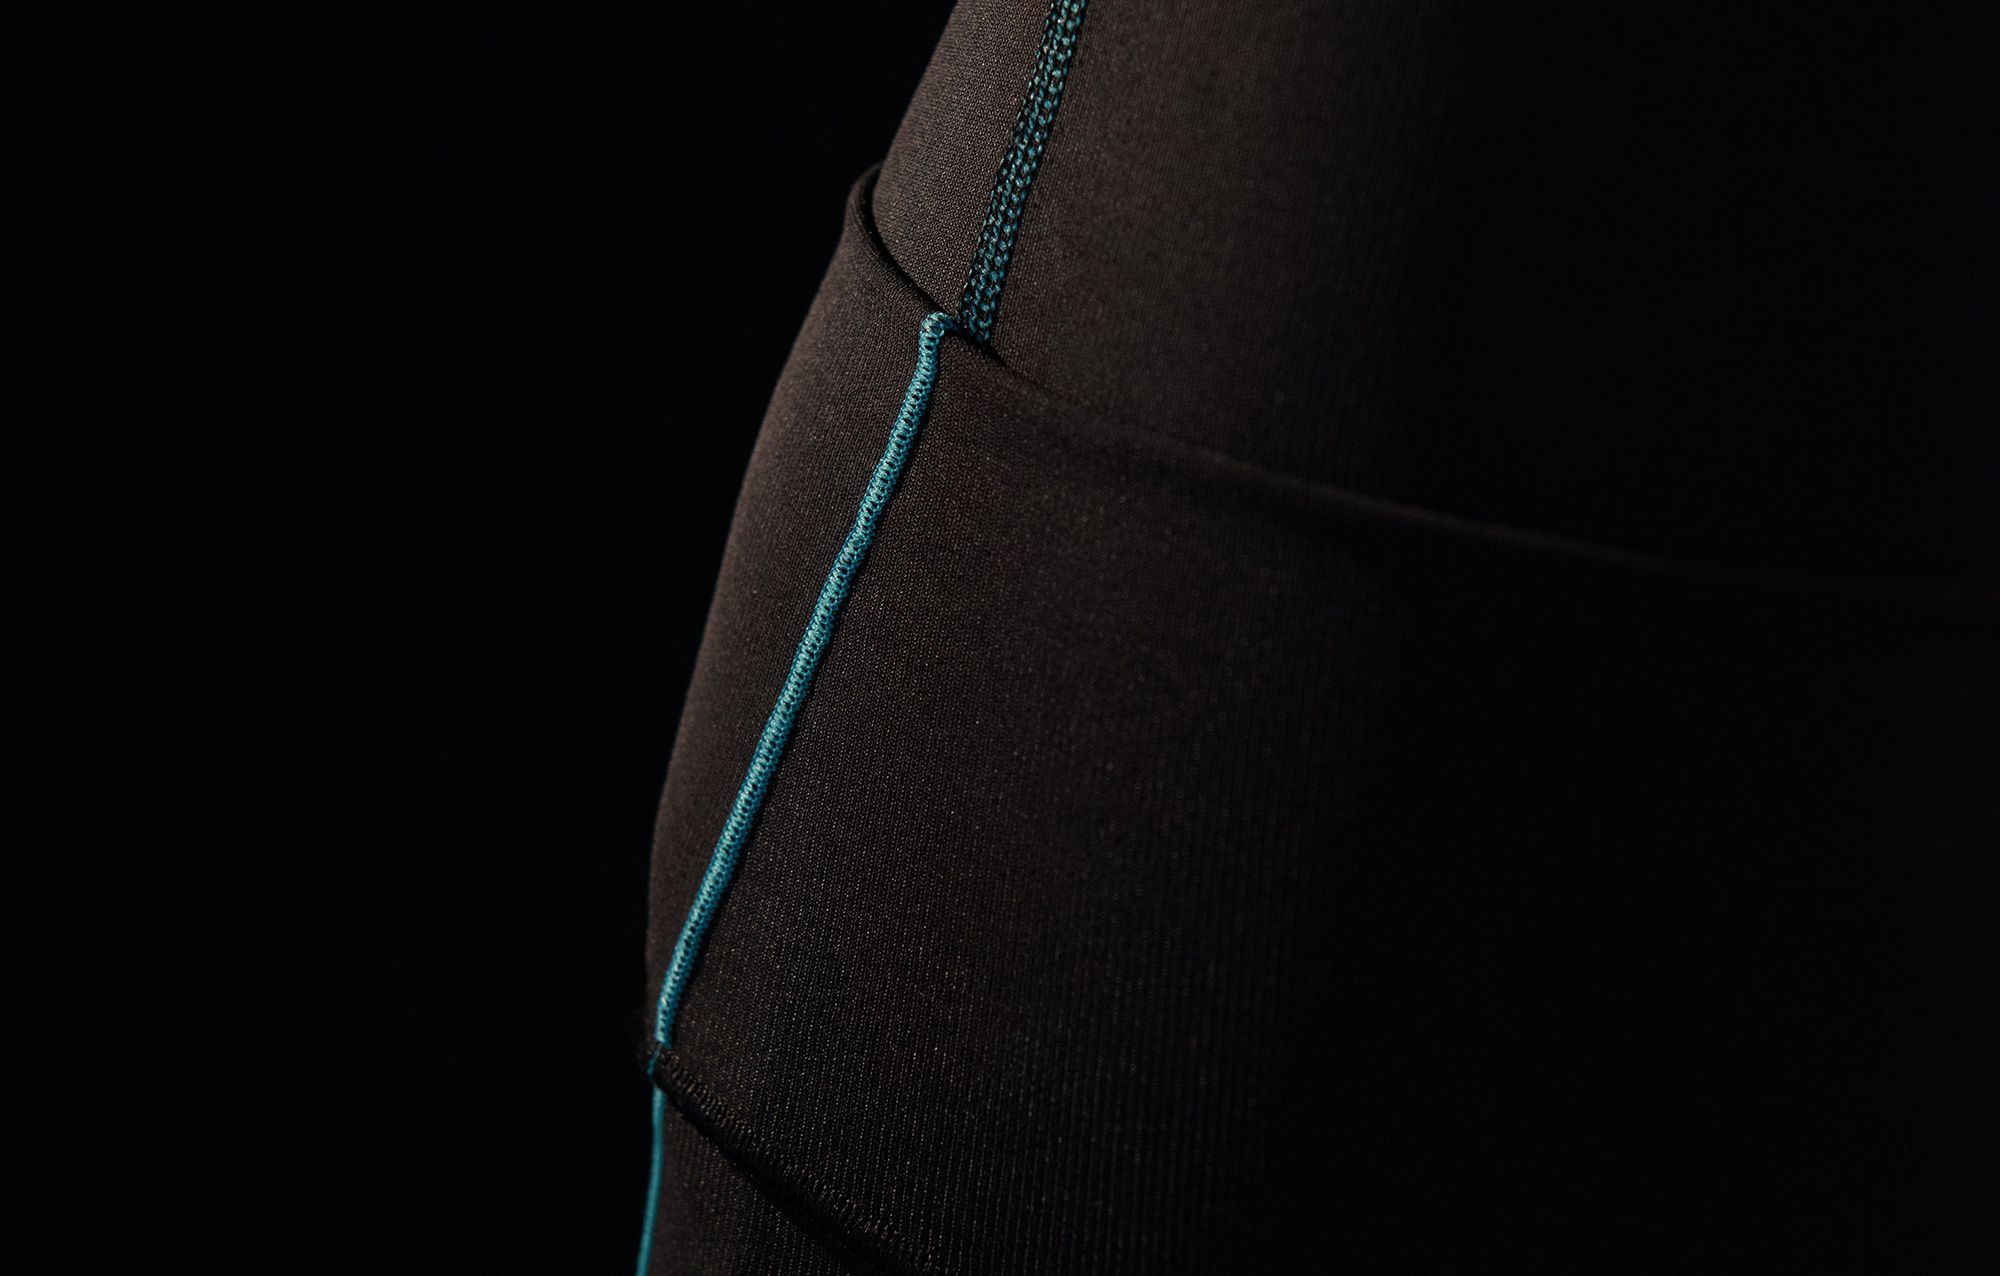 Detailed photograph of a Marena Sport garment's stitching